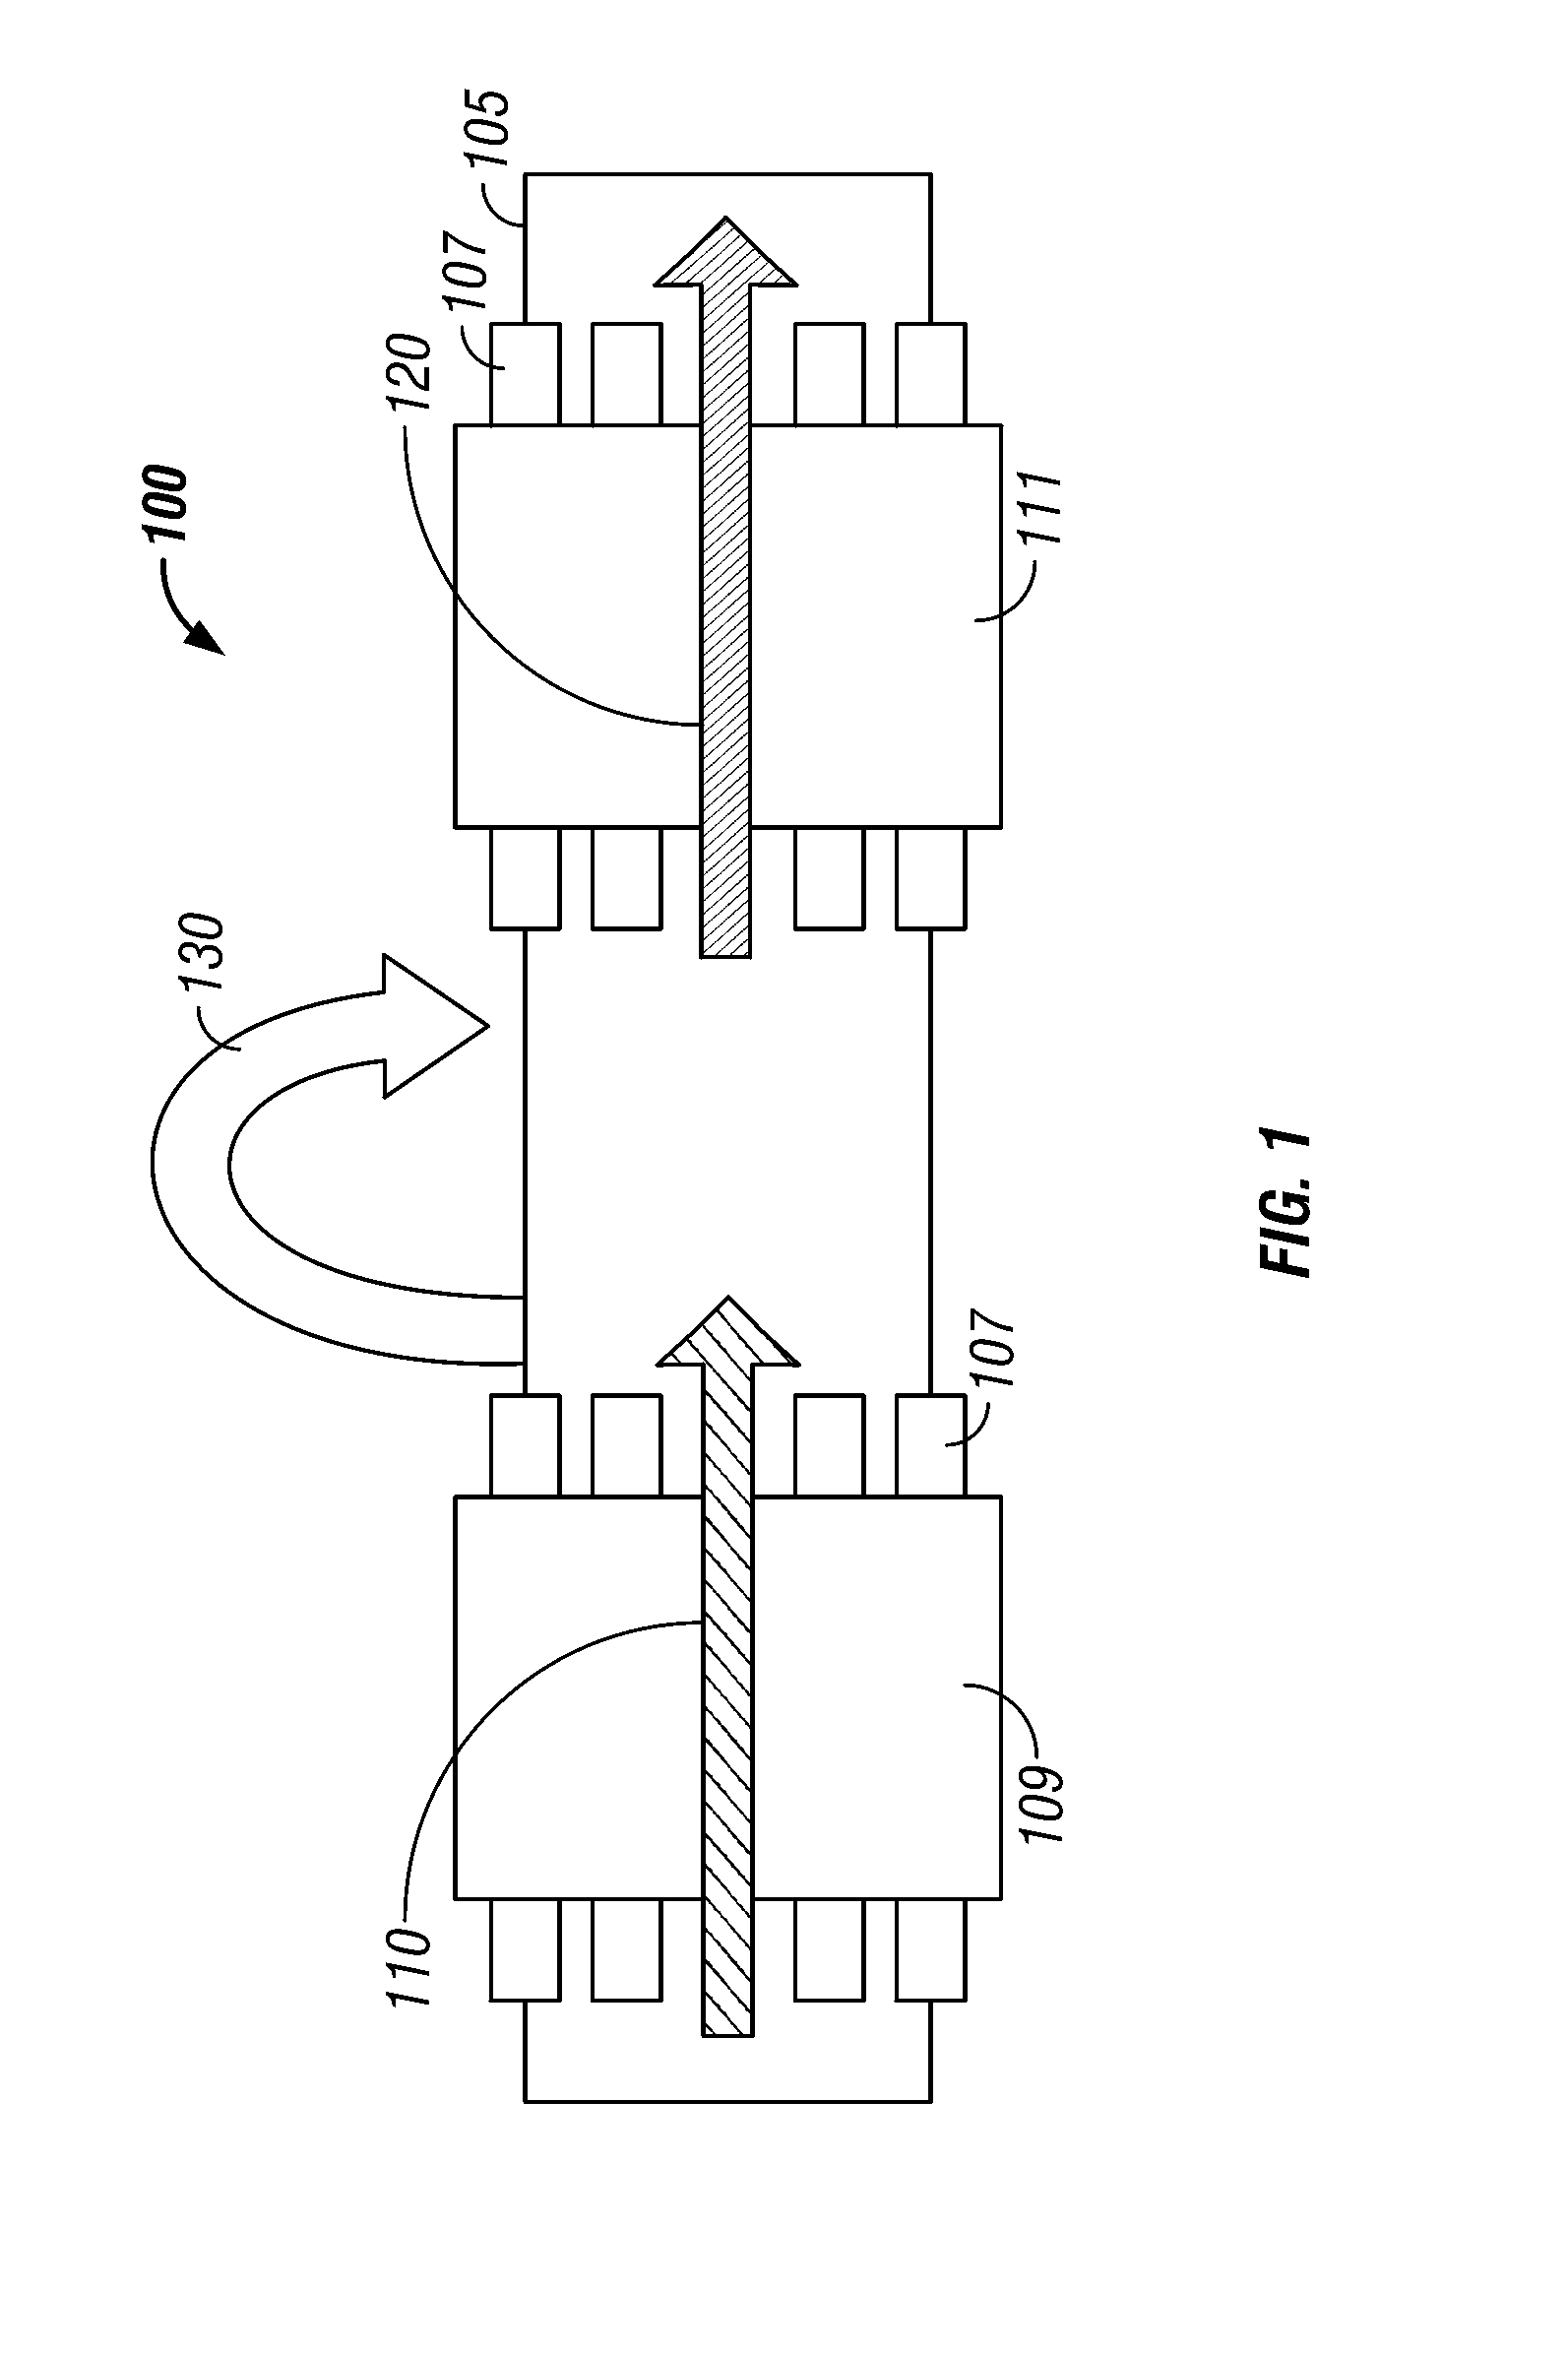 Method and apparatus for multi-component induction instrument measuring system for geosteering and formation resistivity data interpretation in horizontal, vertical and deviated wells